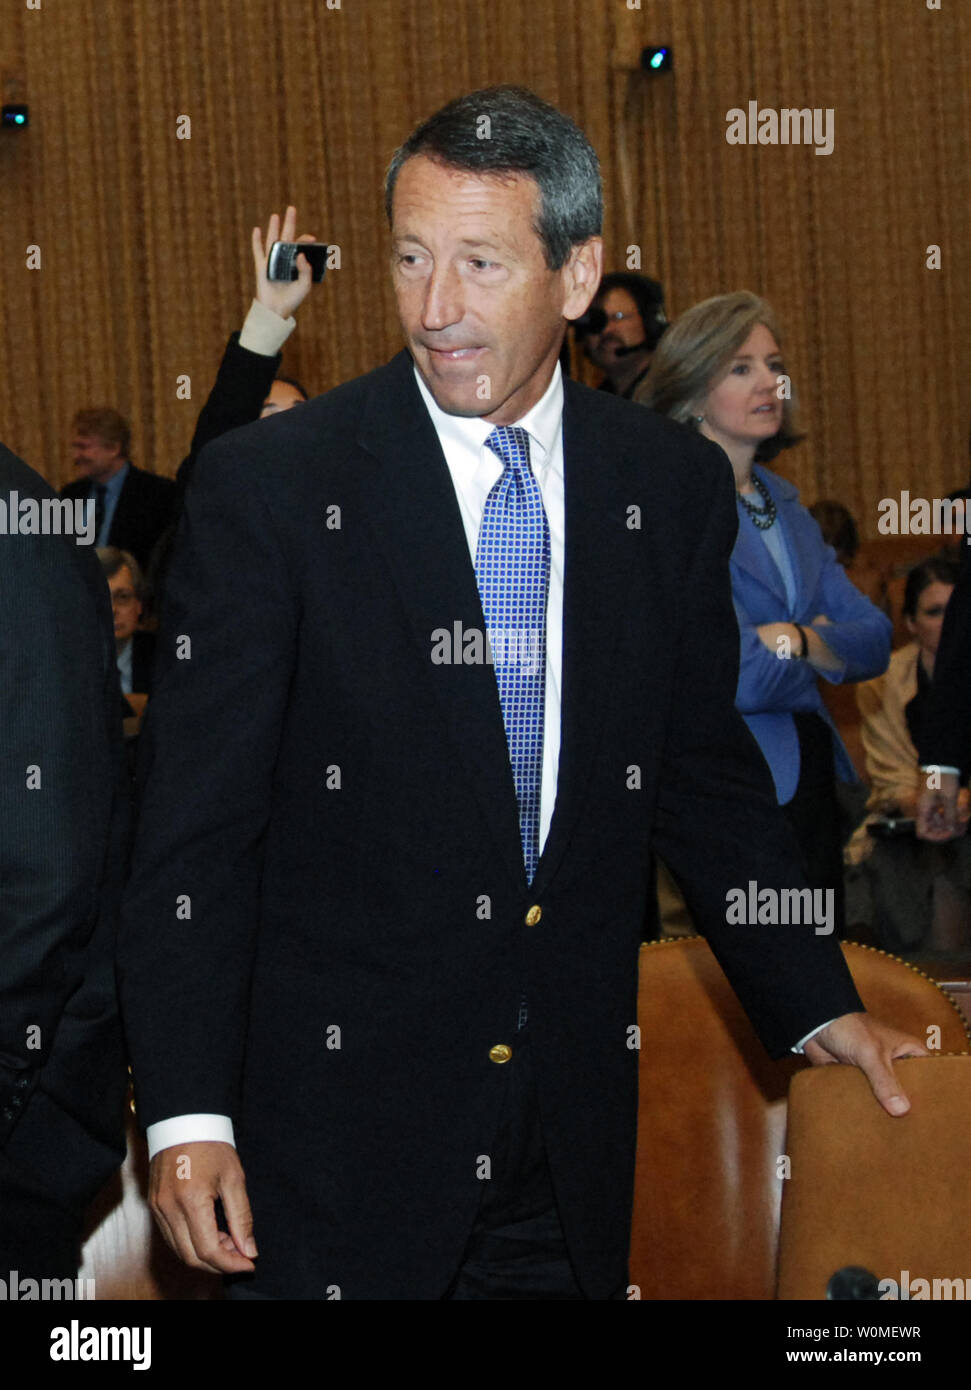 South Carolina Gov. Mark Sanford, seen in an October 29, 2008 file photo at a Committee on Ways and Means hearing on Capitol Hill in Washington, admitted to an extramarital affair on June 24, 2009, after he disappeared from South Carolina for a week, secretly traveling to Argentina with his mistress. (UPI Photo/Alexis C. Glenn/File) Stock Photo